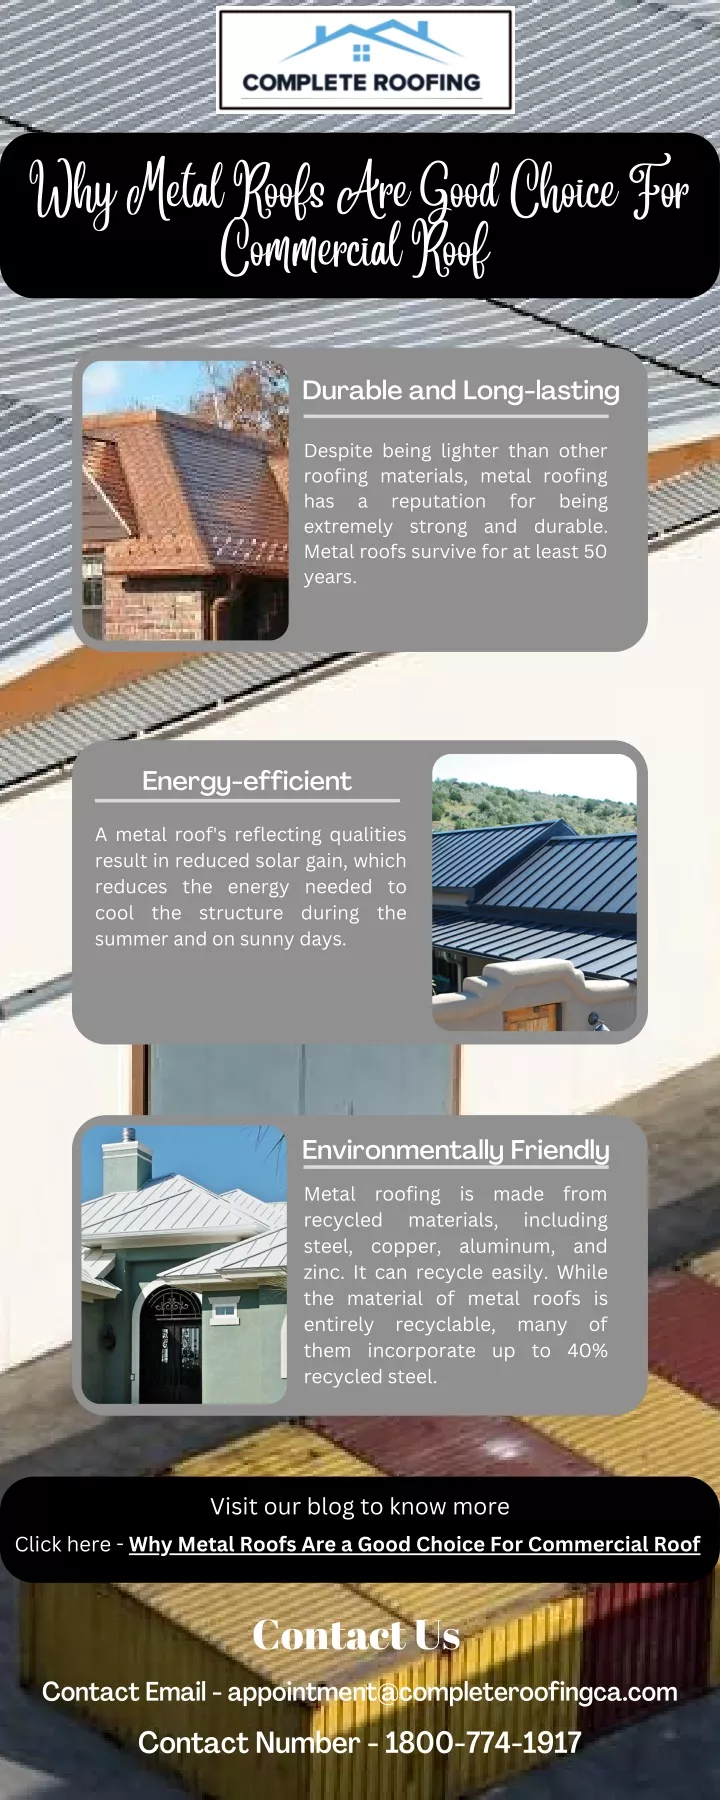 why metal roofs are good choice for commercial